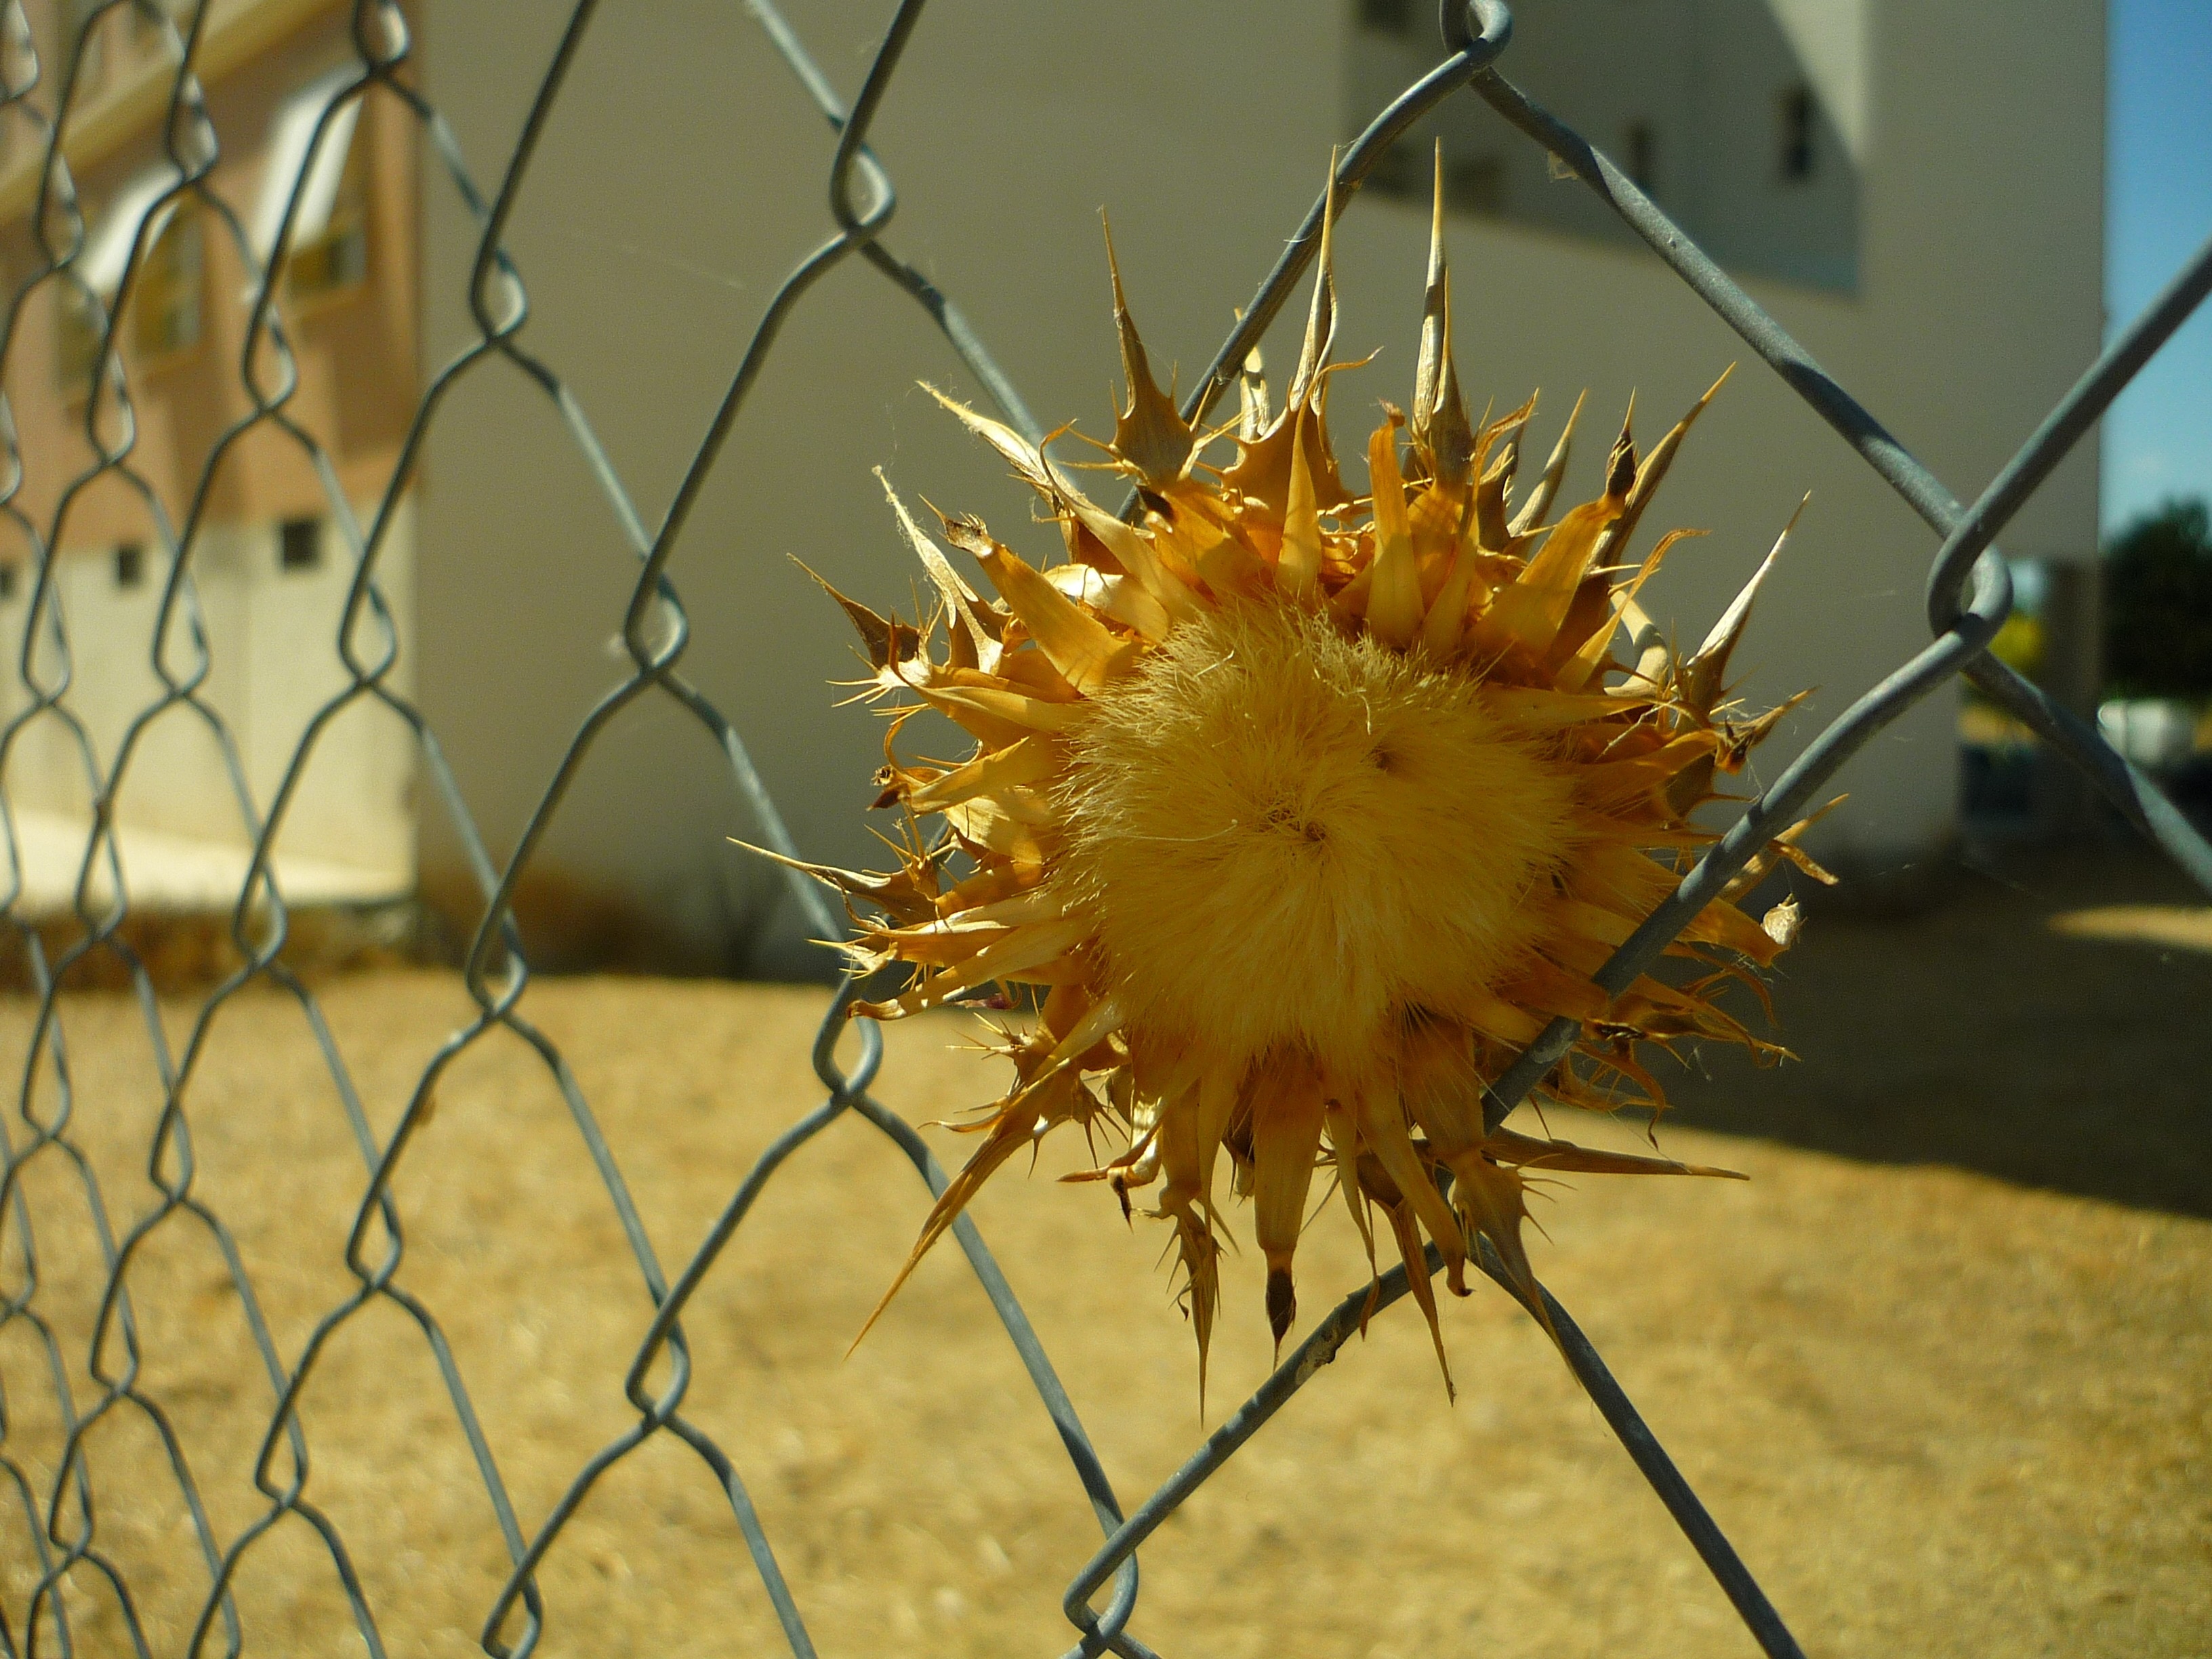 Locked Up, Wired, Thistle, Dam, Solar, safety, protection